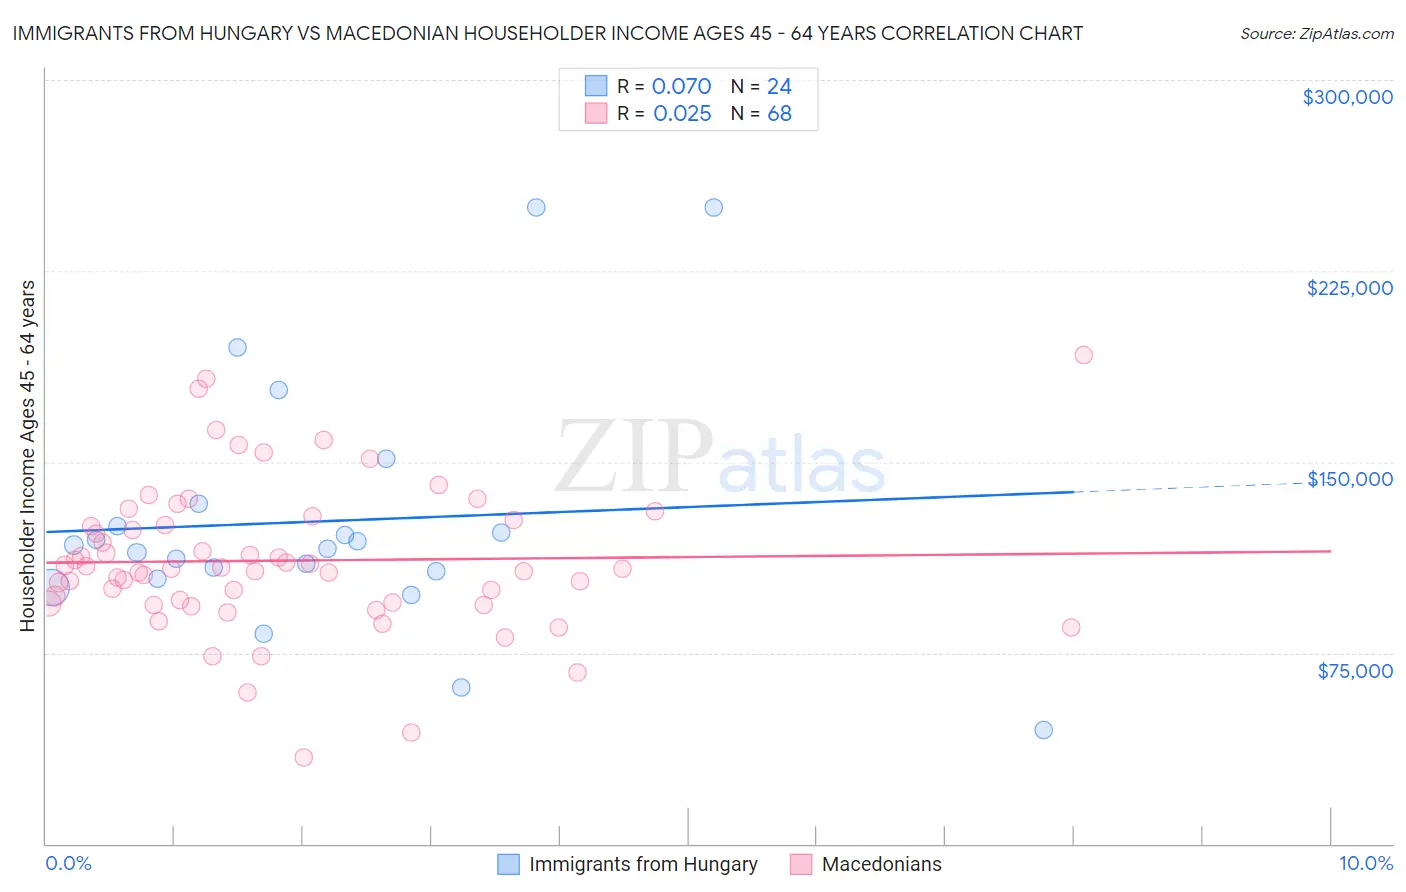 Immigrants from Hungary vs Macedonian Householder Income Ages 45 - 64 years